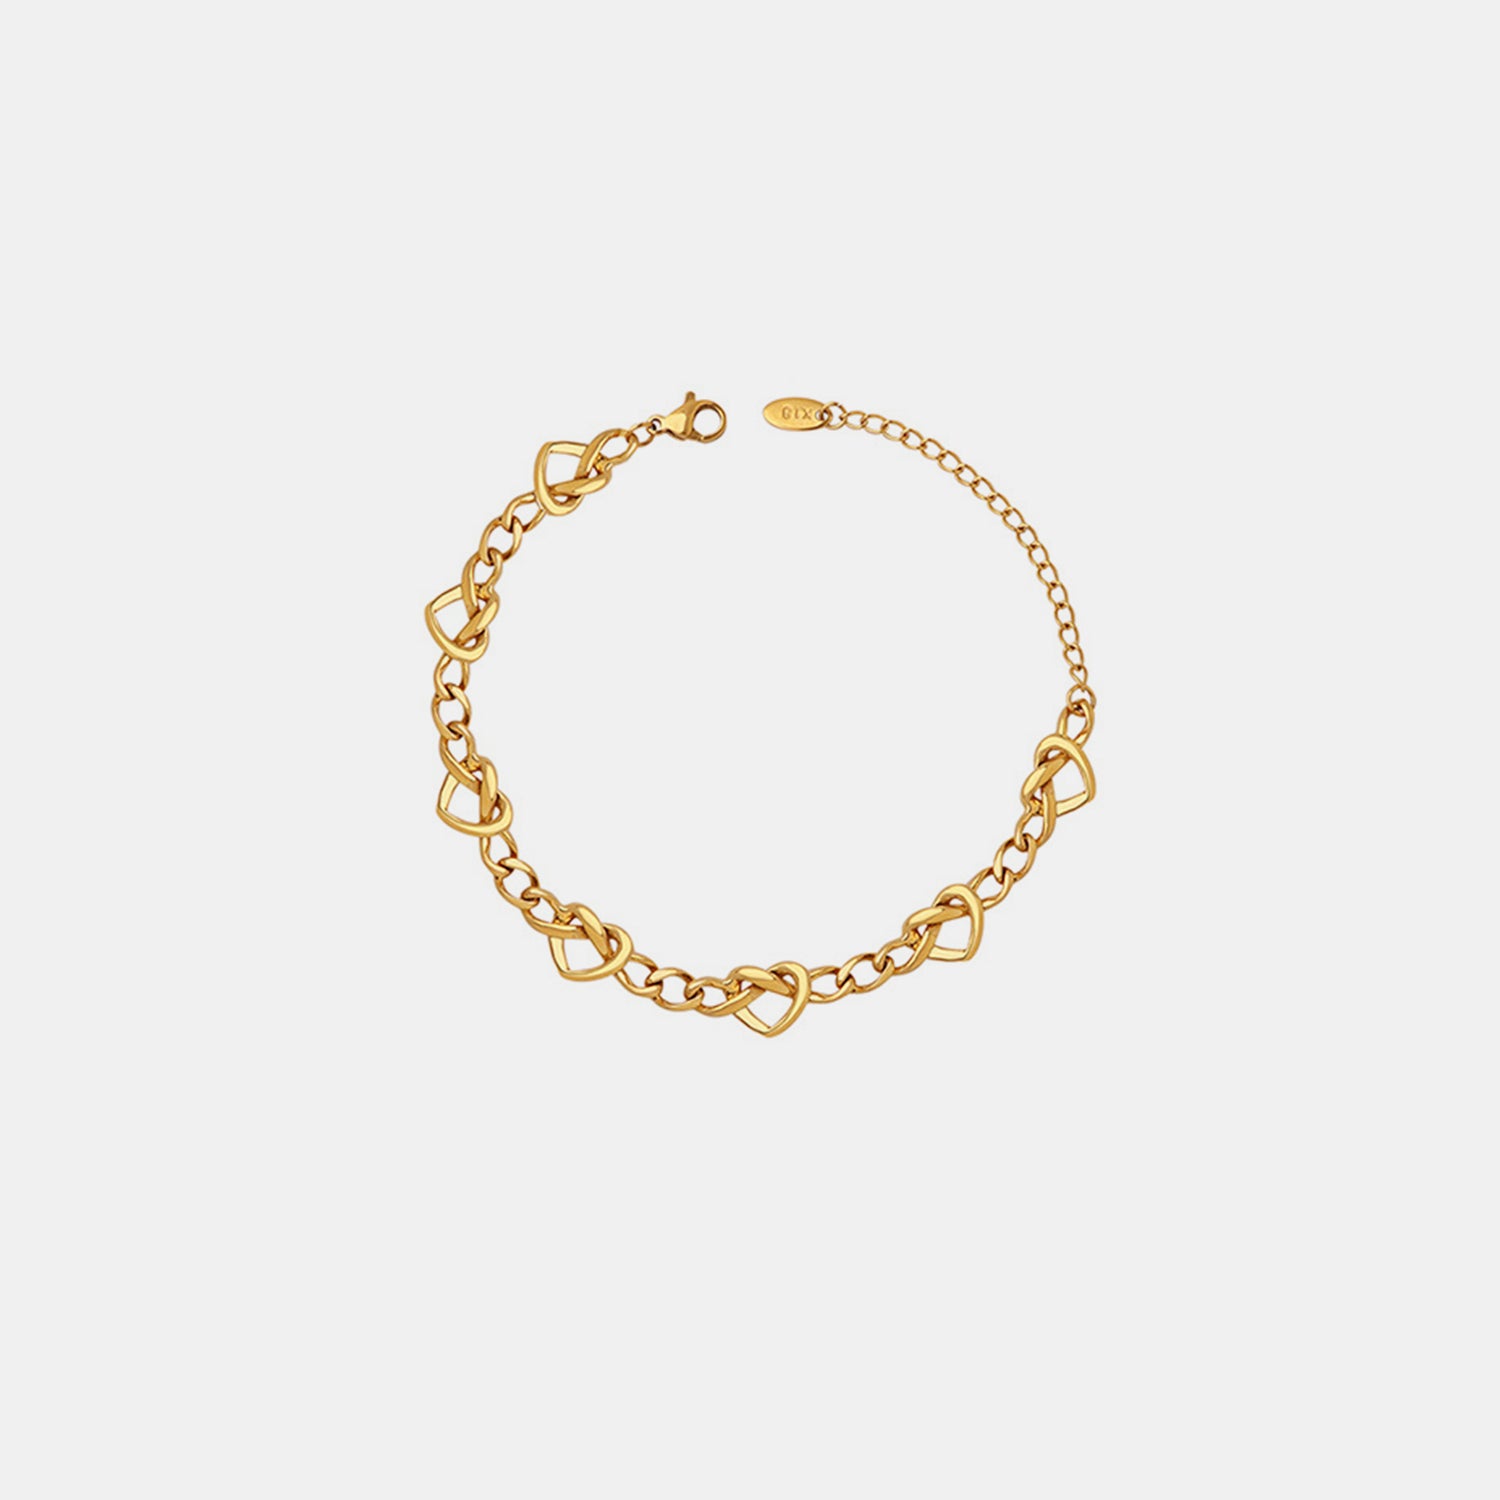 18K Gold-Plated Titanium Steel Bracelet - Tophatter Deals and Online Shopping - Electronics, Jewelry, Beauty, Health, Gadgets, Fashion - Tophatter's Discounts & Offers - tophatters - tophatters.co